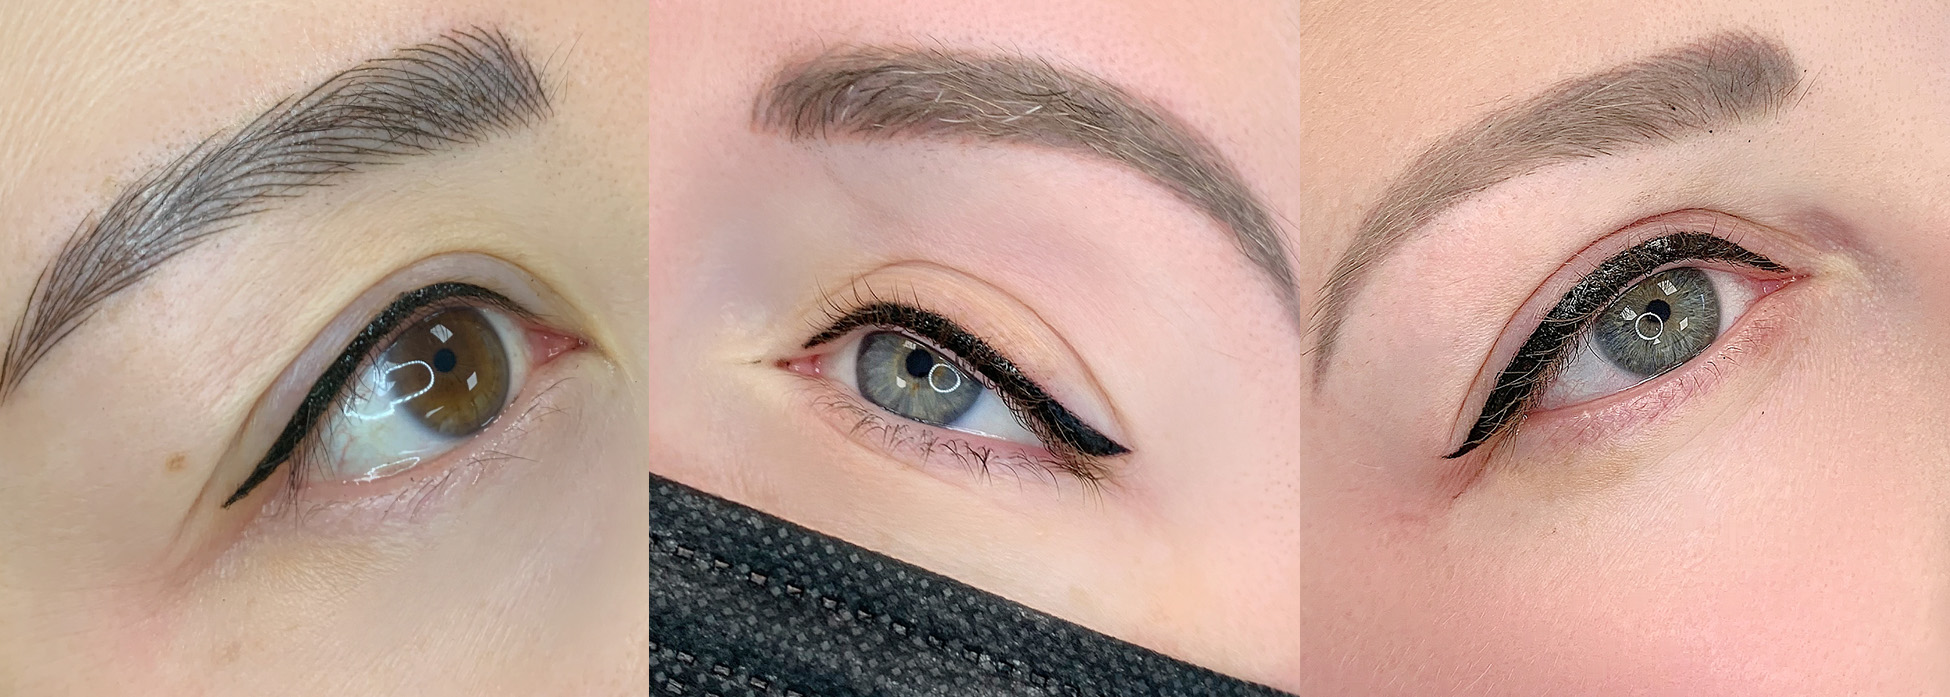 Is Permanent Eyeliner Worth It? I Tried It to Find Out